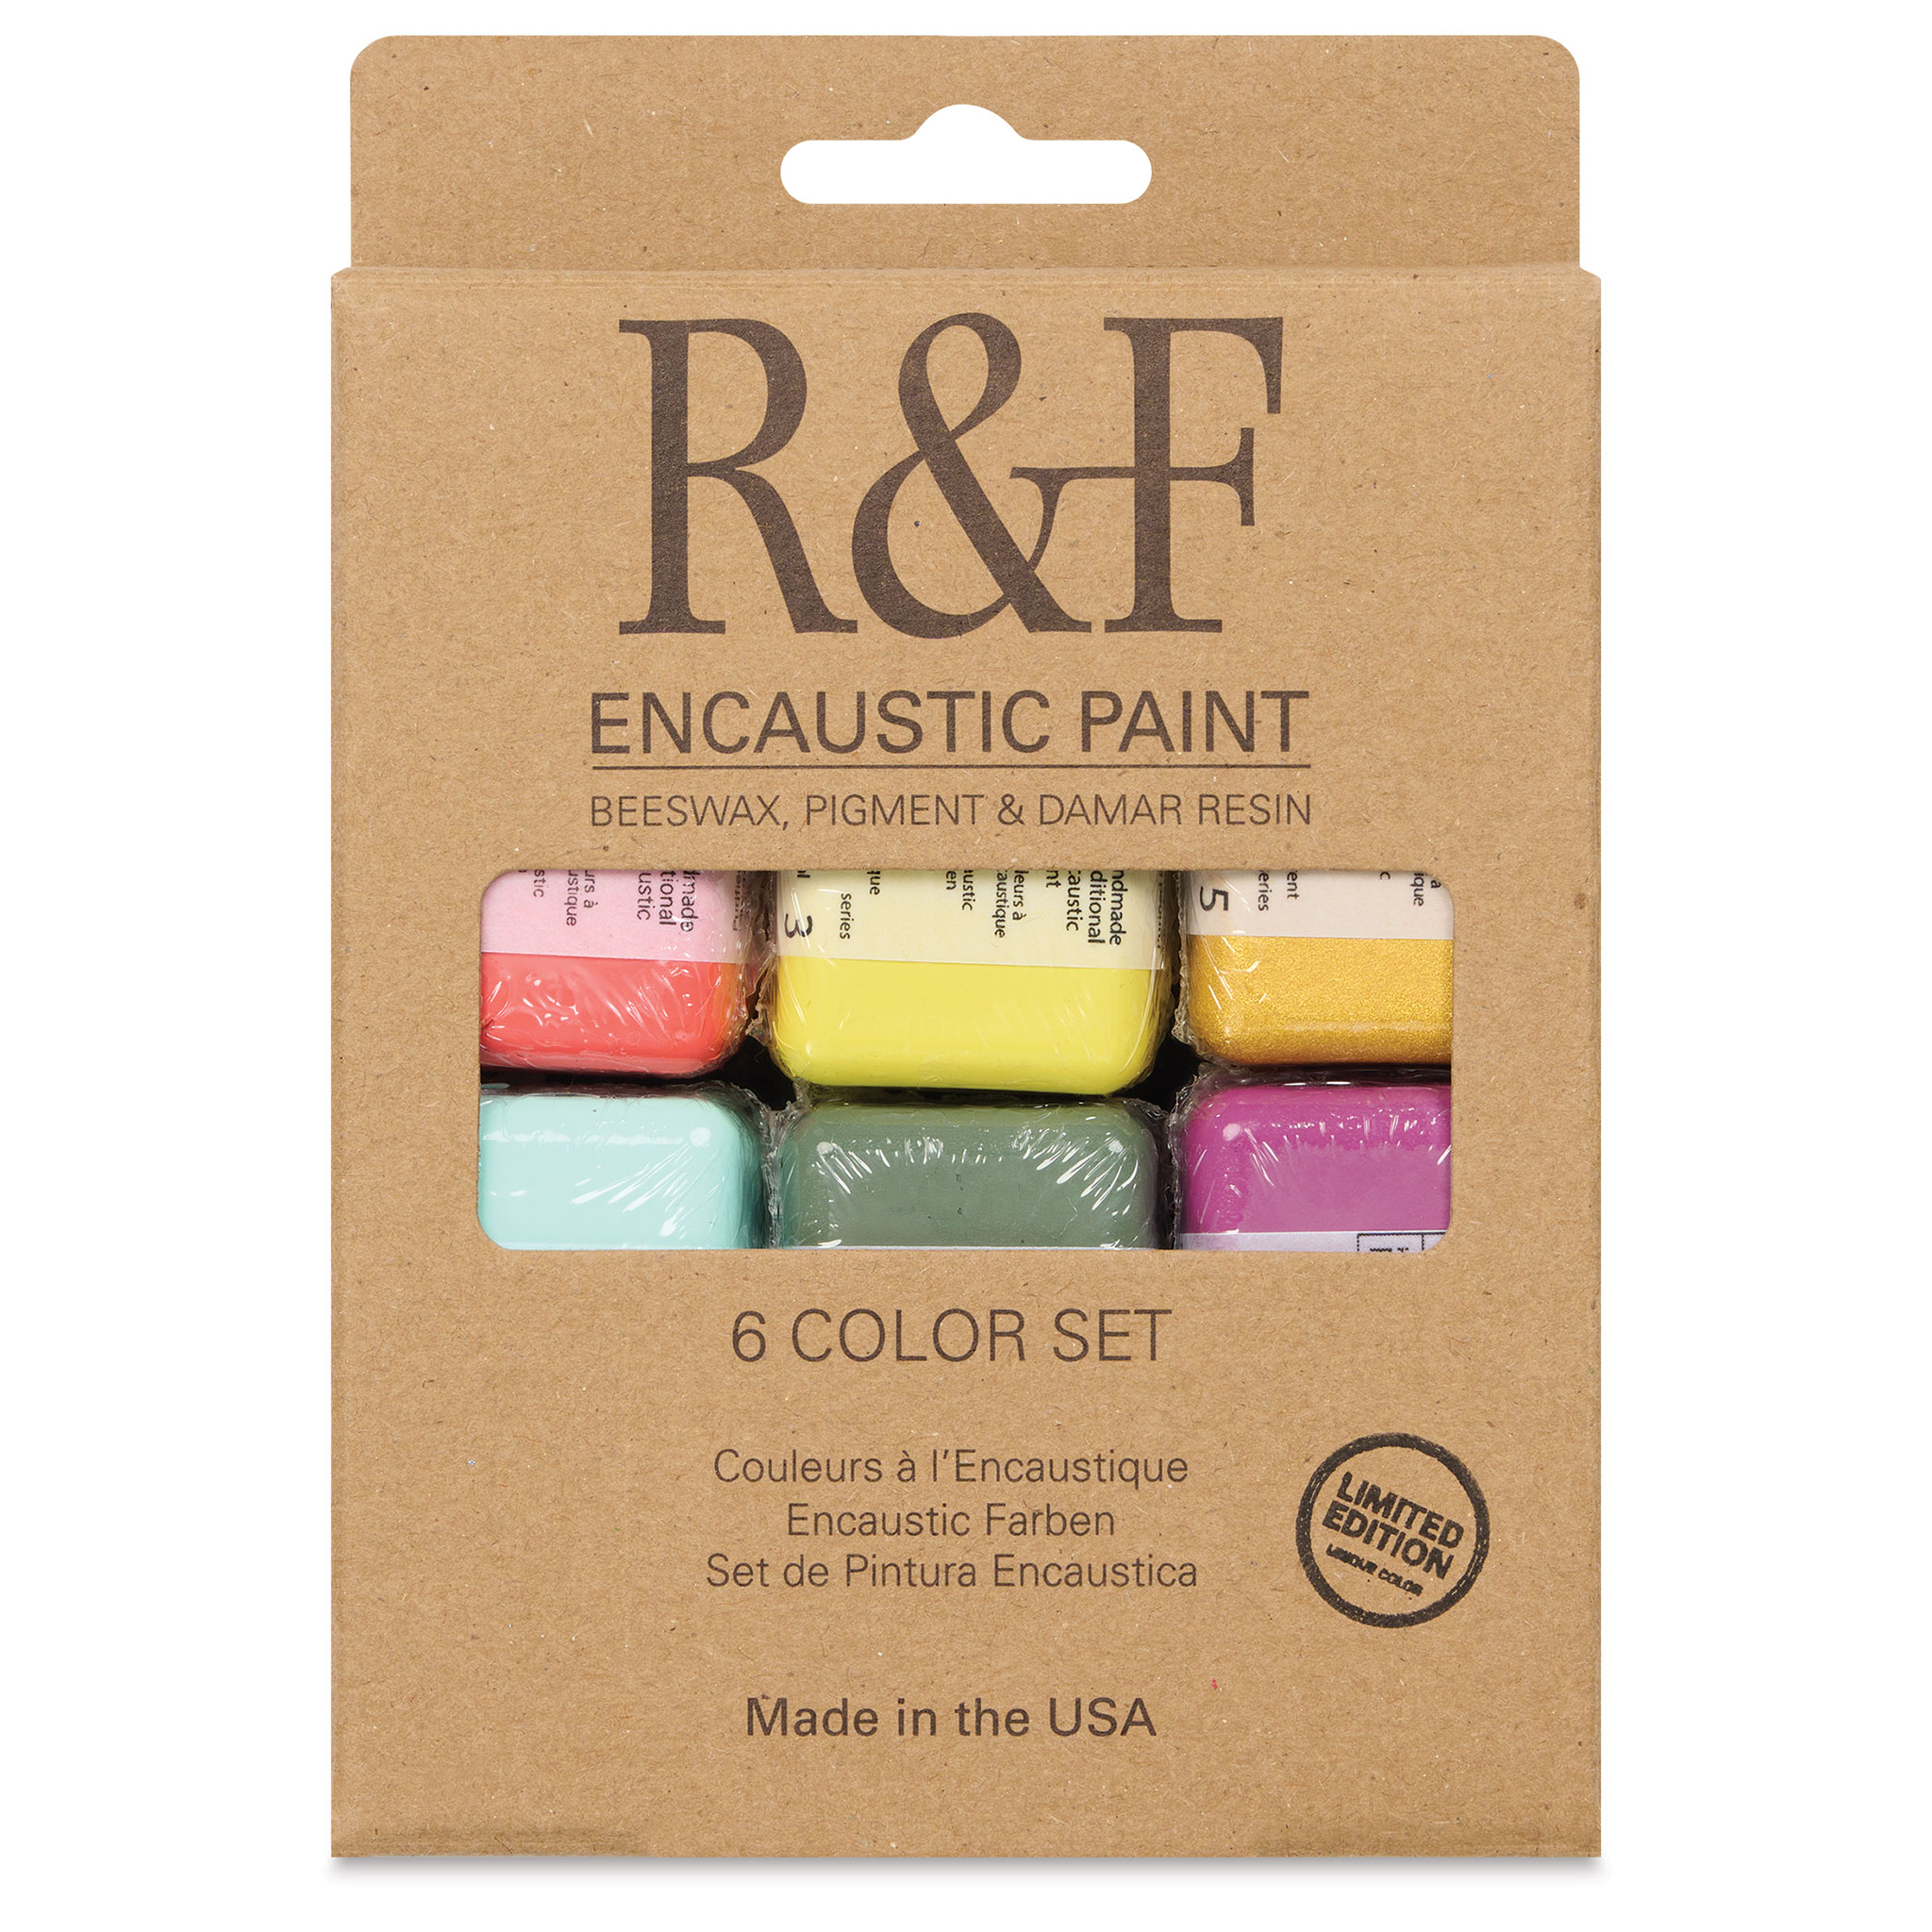 ENCAUSTIC SUPPLIES, WAX Painting, 2 pack black and white, R&F brand,  encaustic art, beeswax paint, mixed media, on sale, beeswax art, wax